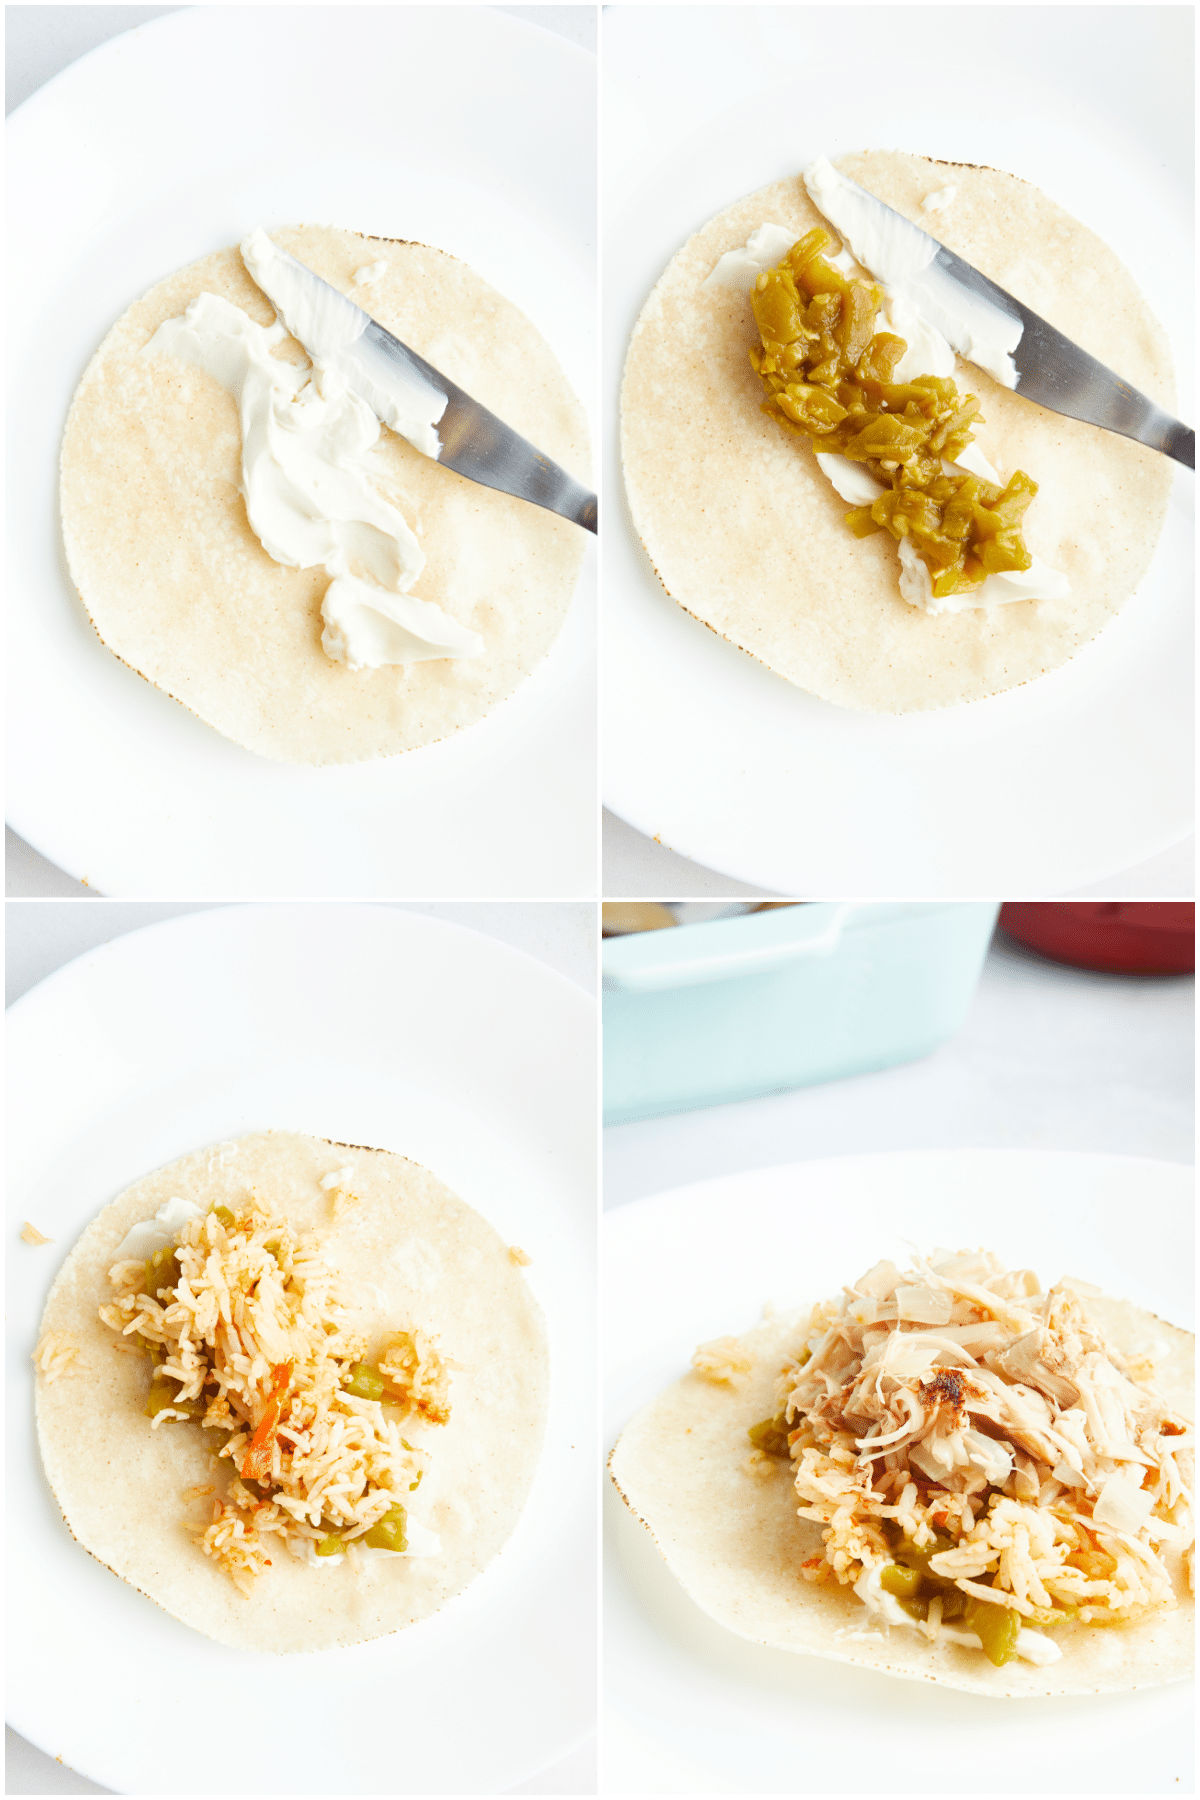 A four image collage showing how to make Hatch chile enchiladas: spread cream cheese on a tortilla, add Hatch chiles, add rice and jackfruit.